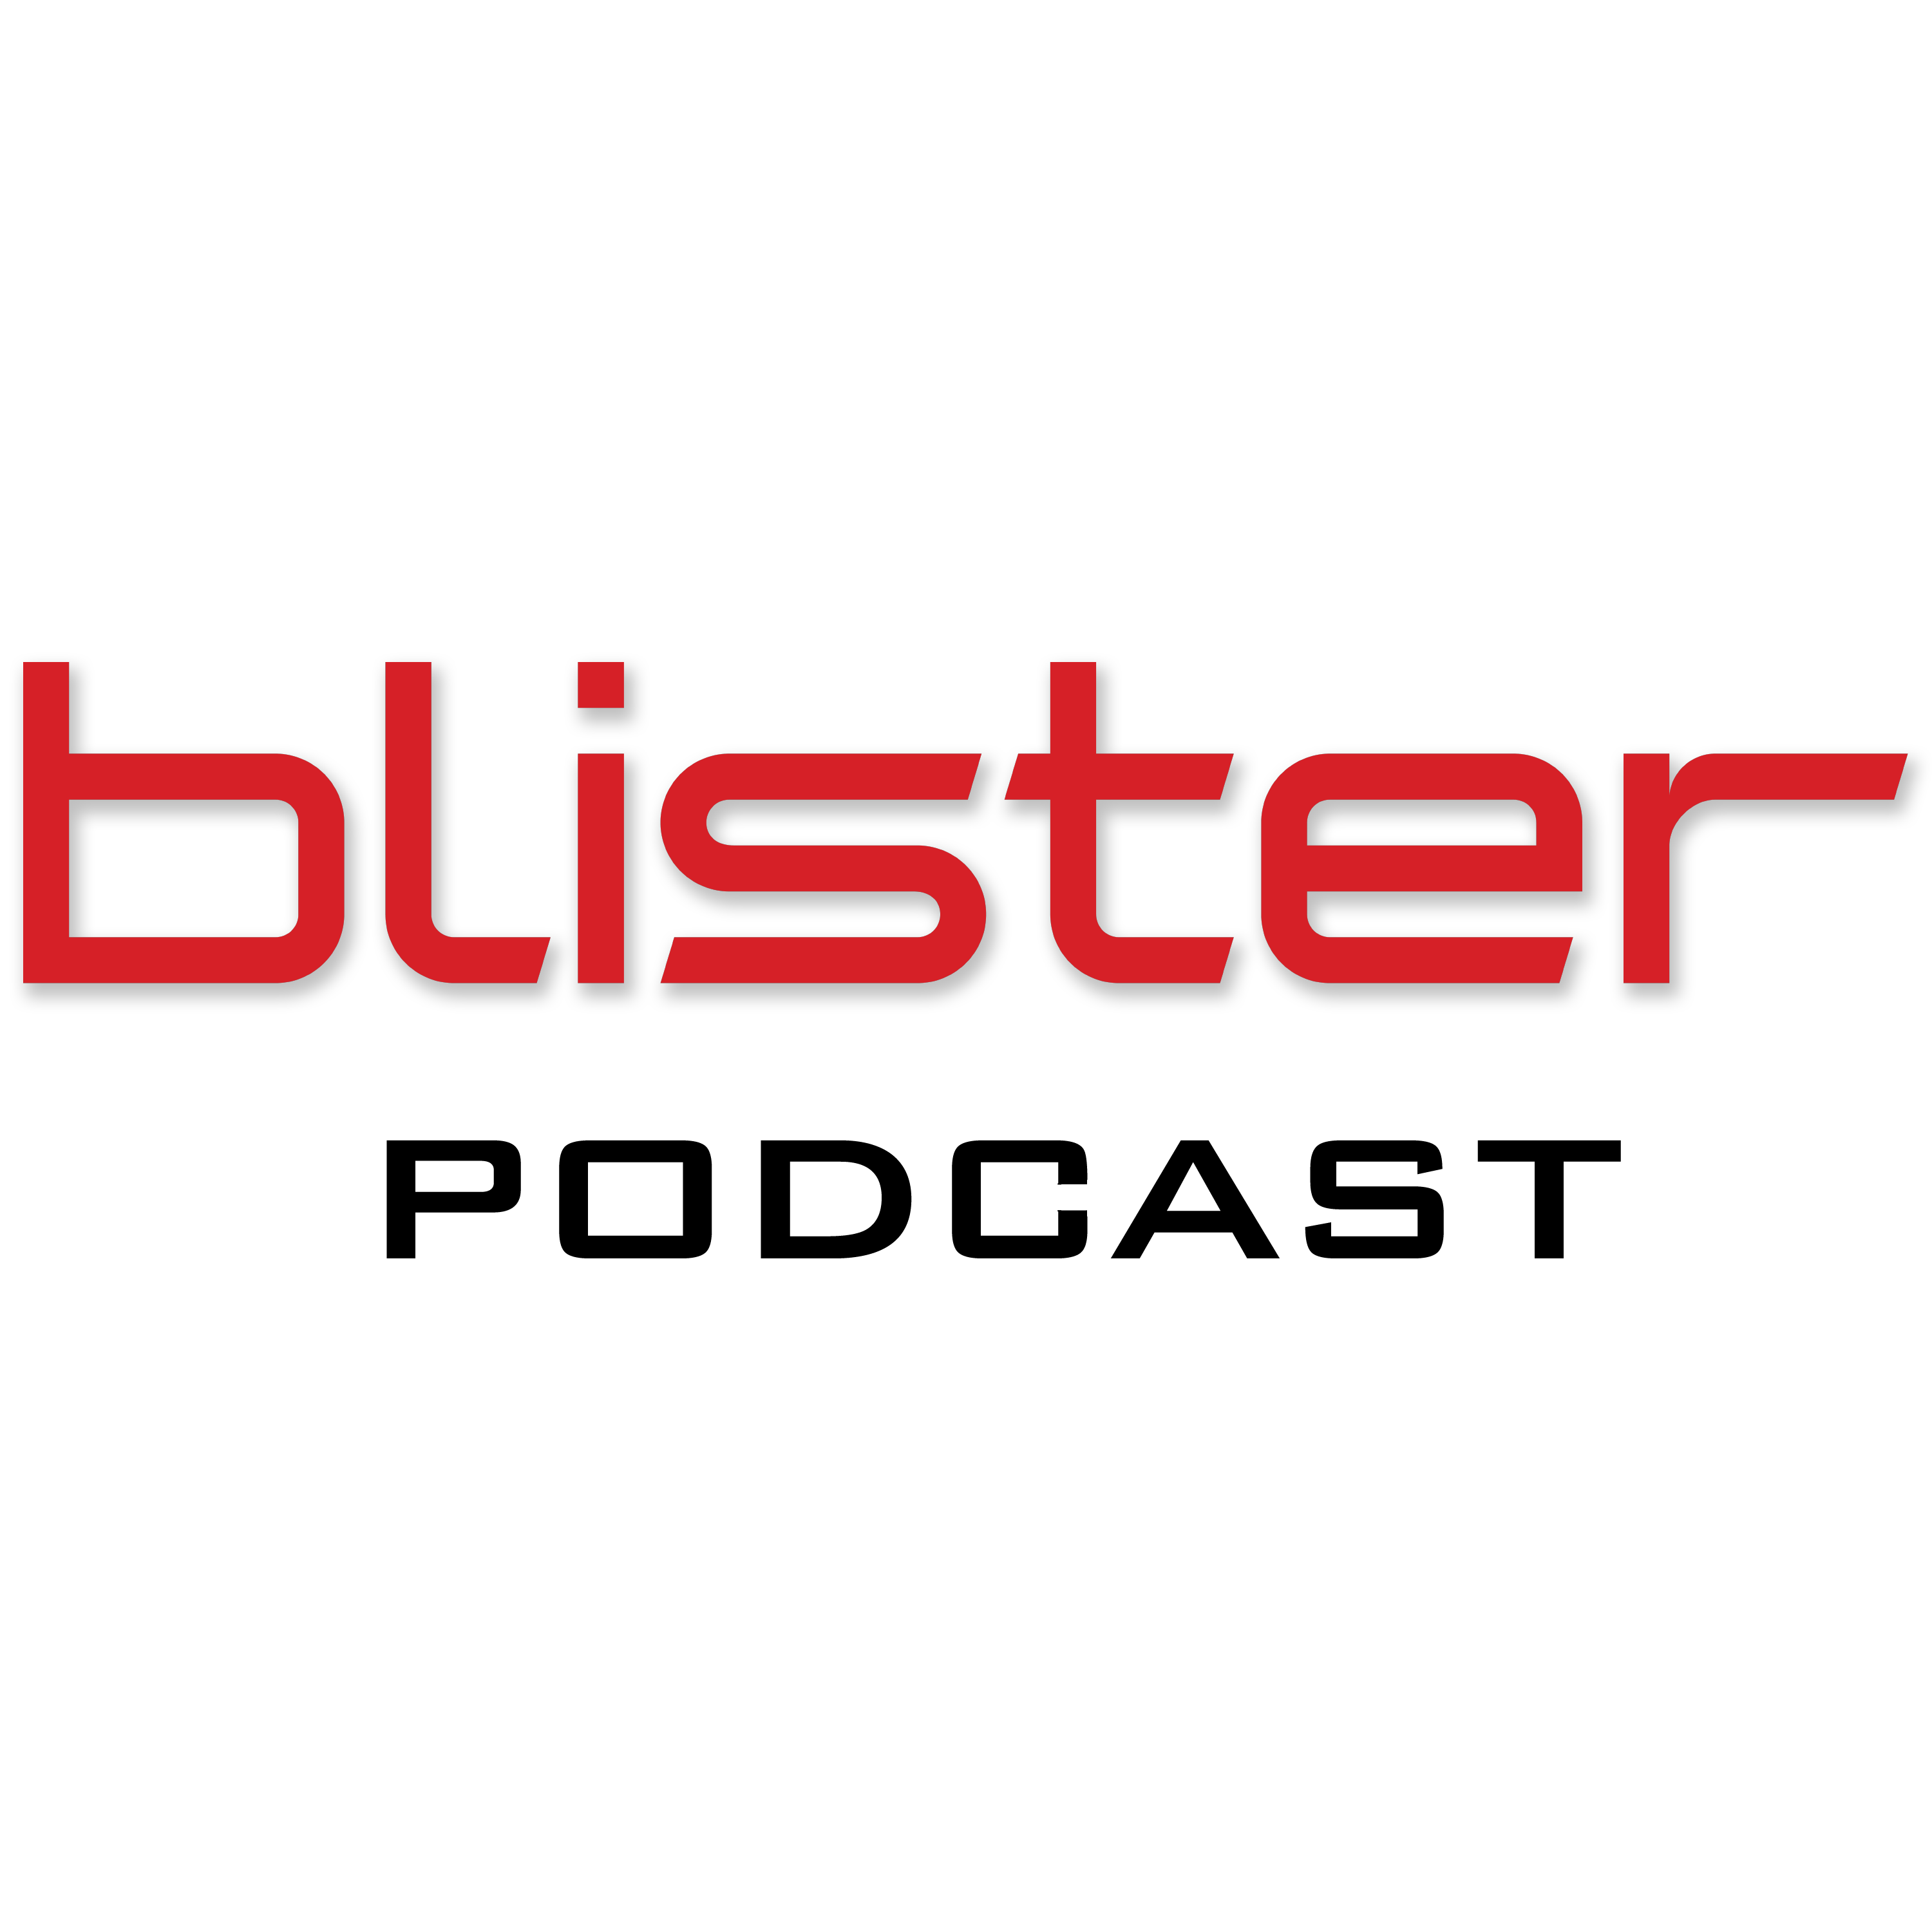 The Blister Podcast